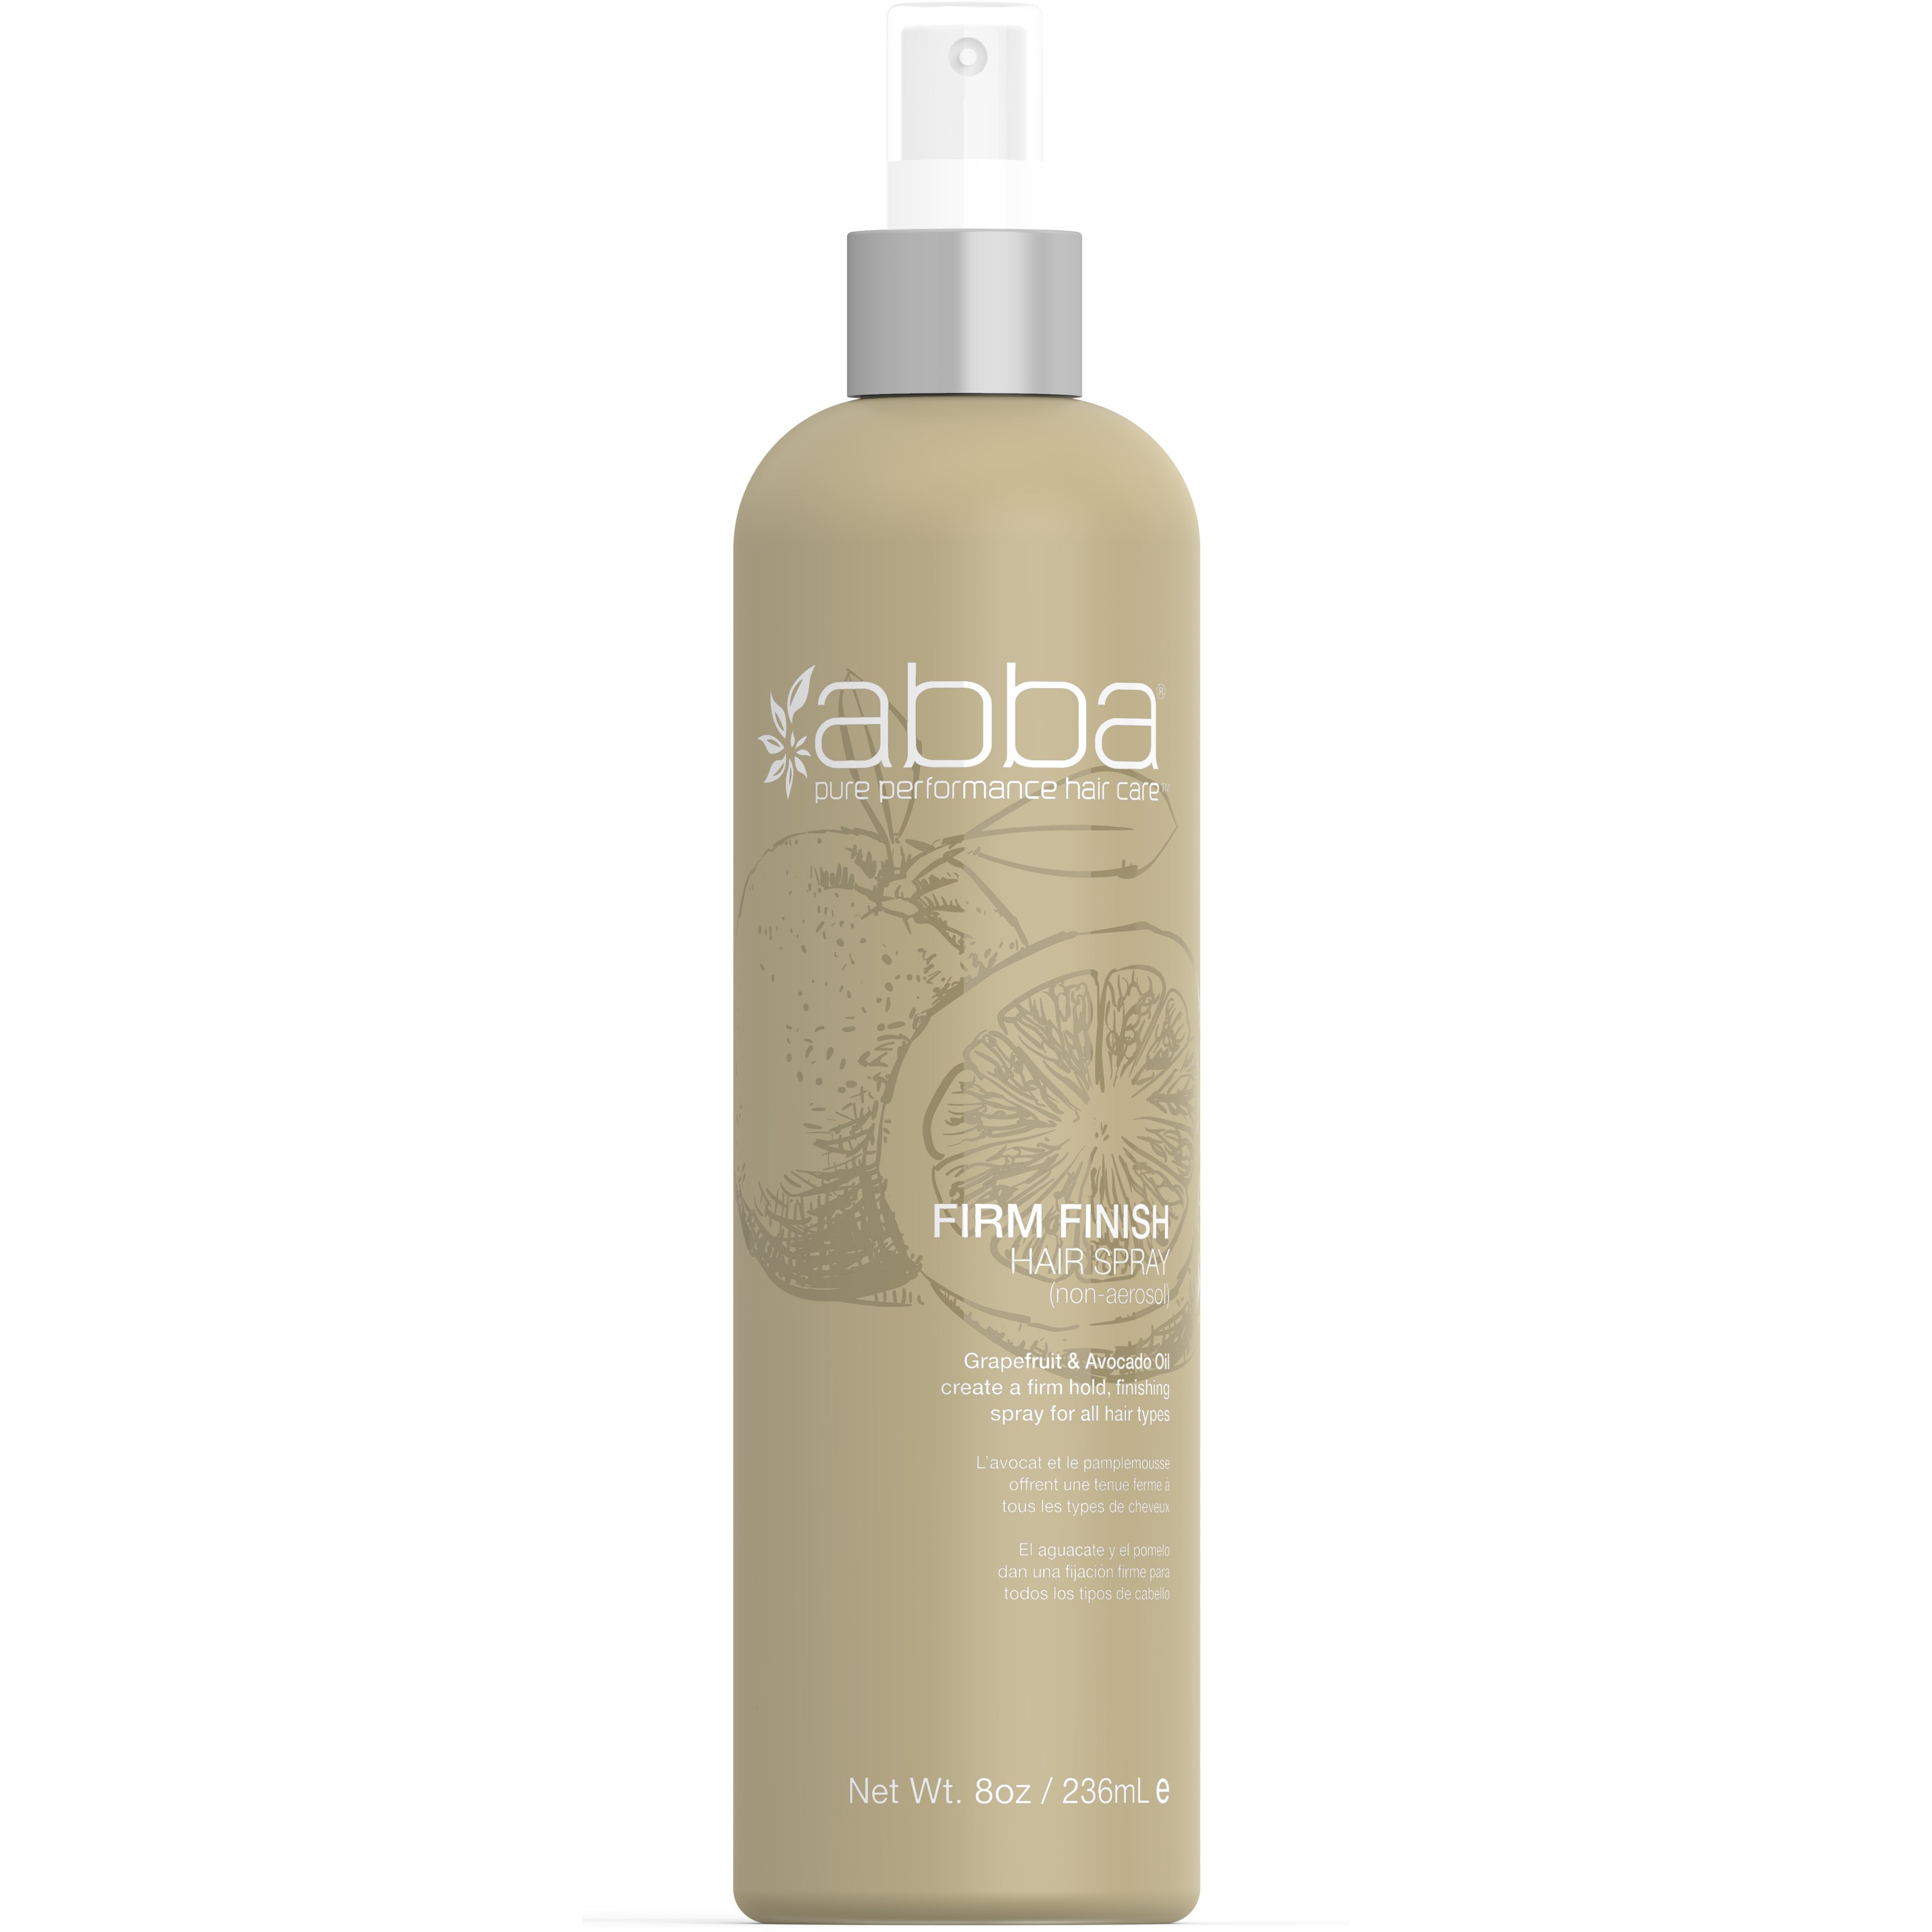 Abba Pure Performace Haircare Firm Finish Spray 236 ml